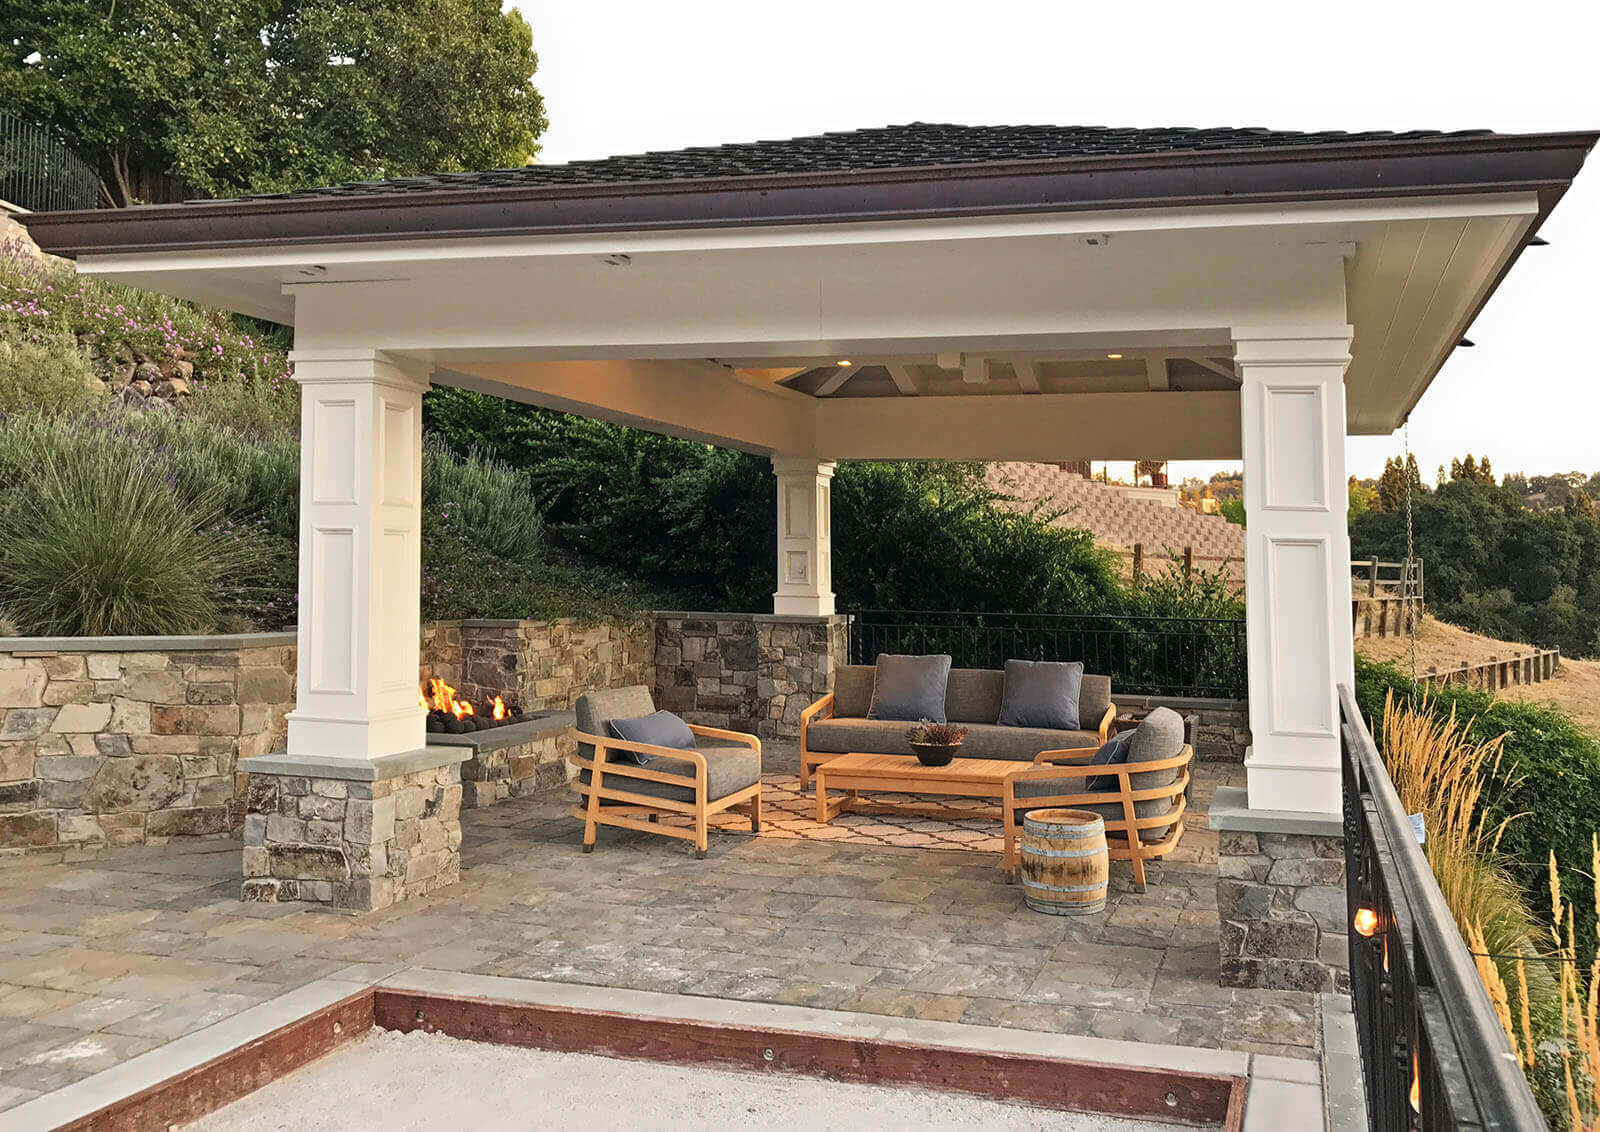 Shingled pergola shades a Sonoma-style bocce lounge on a stone terrace with hillside view